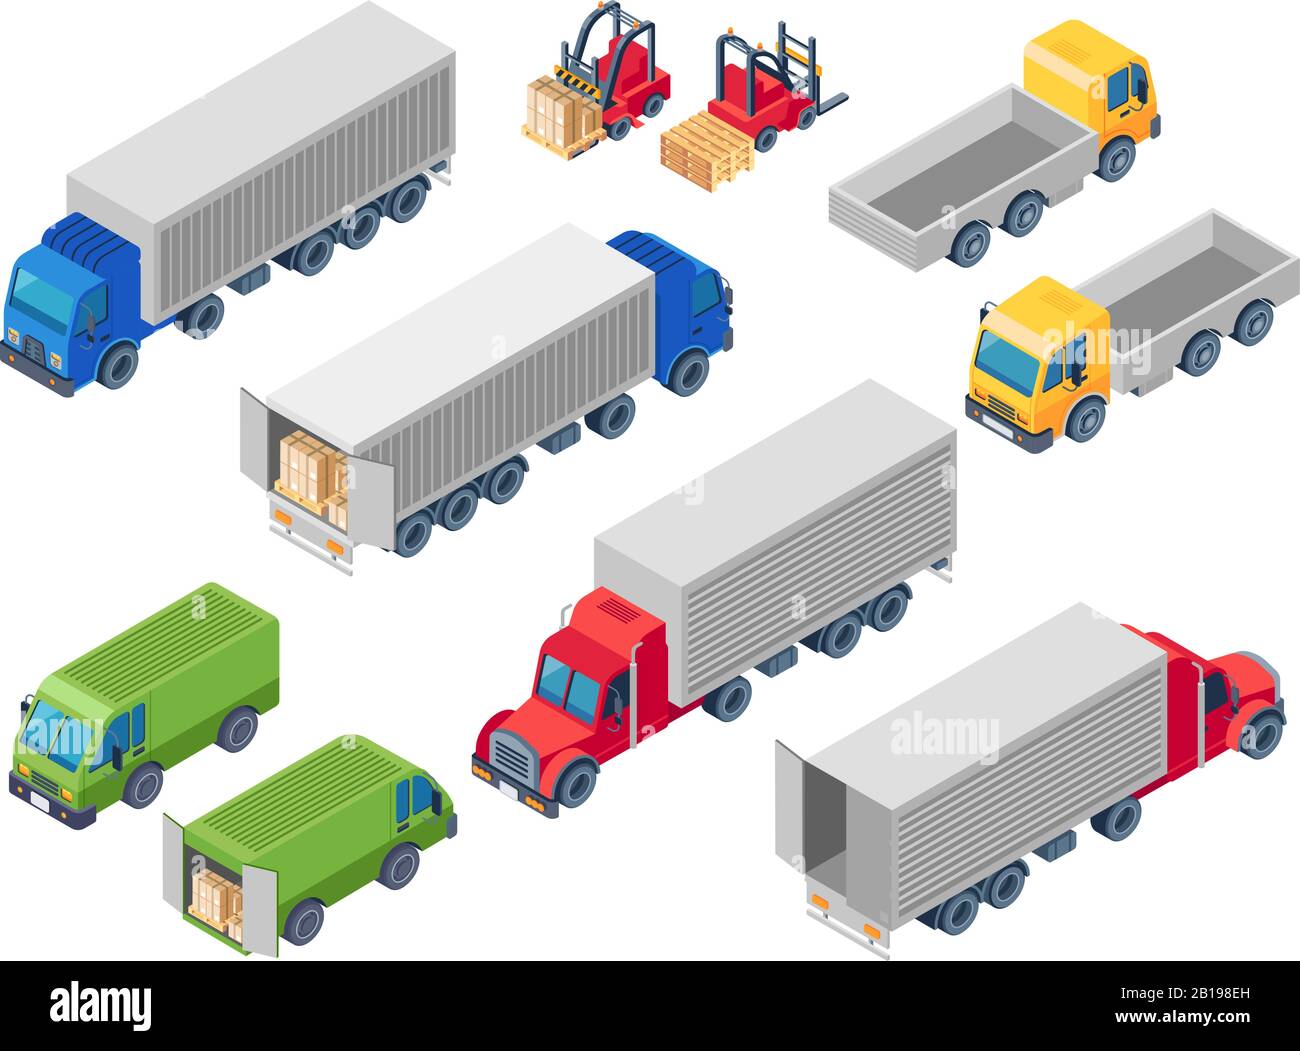 Trucking logistic isometric trucks. Loading truck, cargo container transportation lorry and trailer loader. Van cars 3d vector illustration Stock Vector